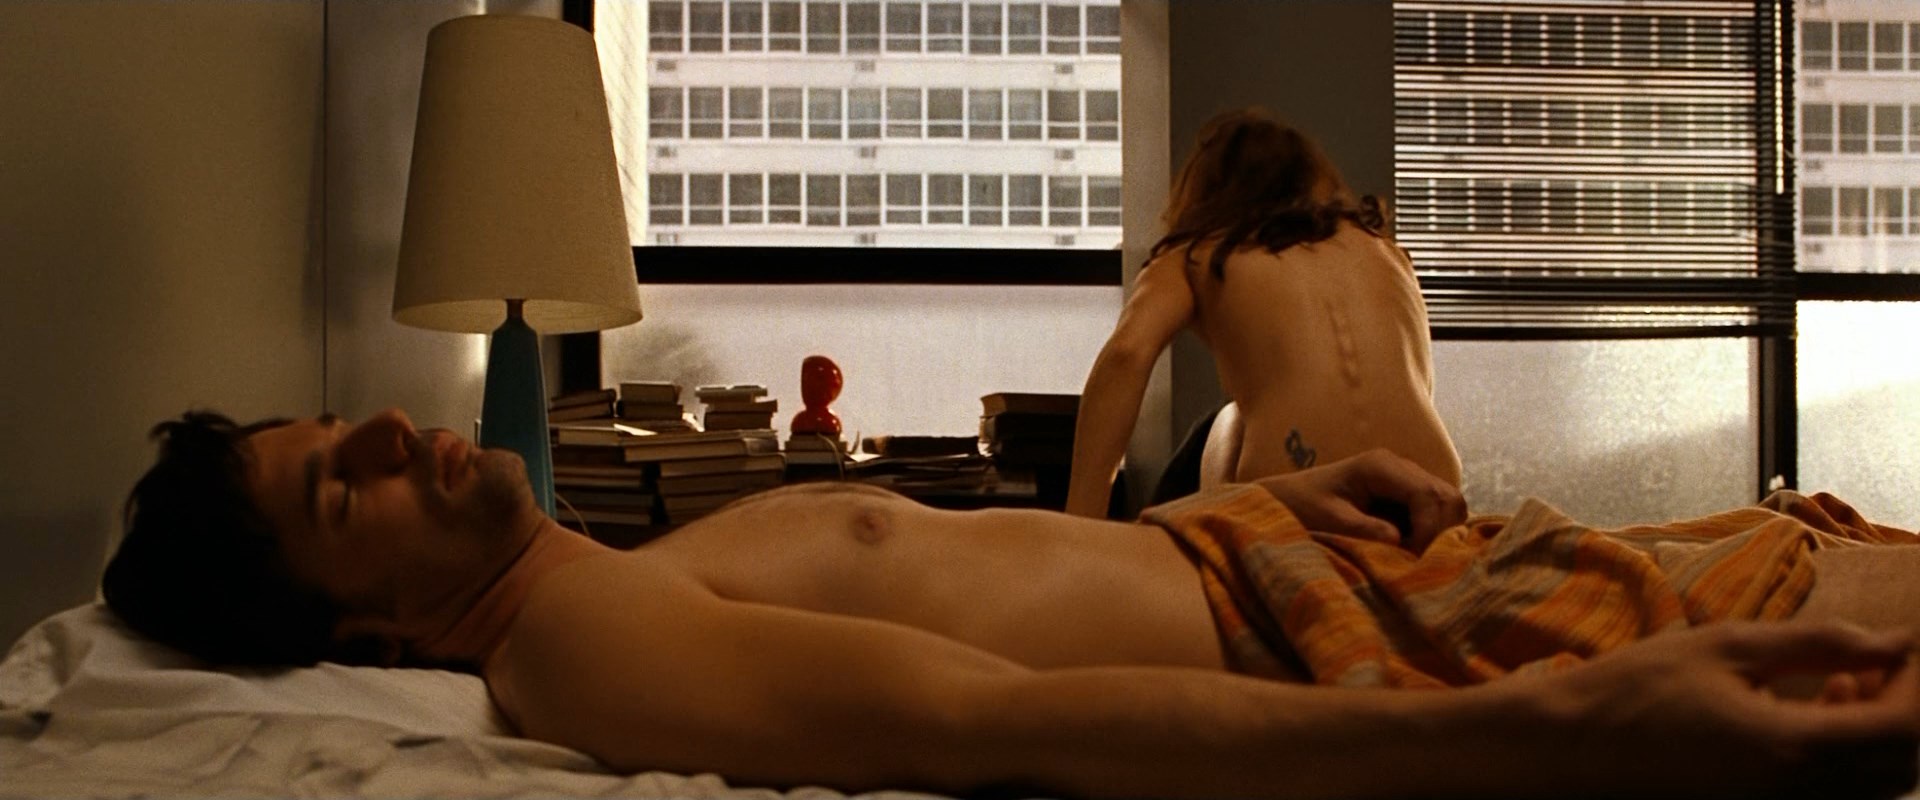 Naked Rachel McAdams gets up from the bed and puts an shirt on. 